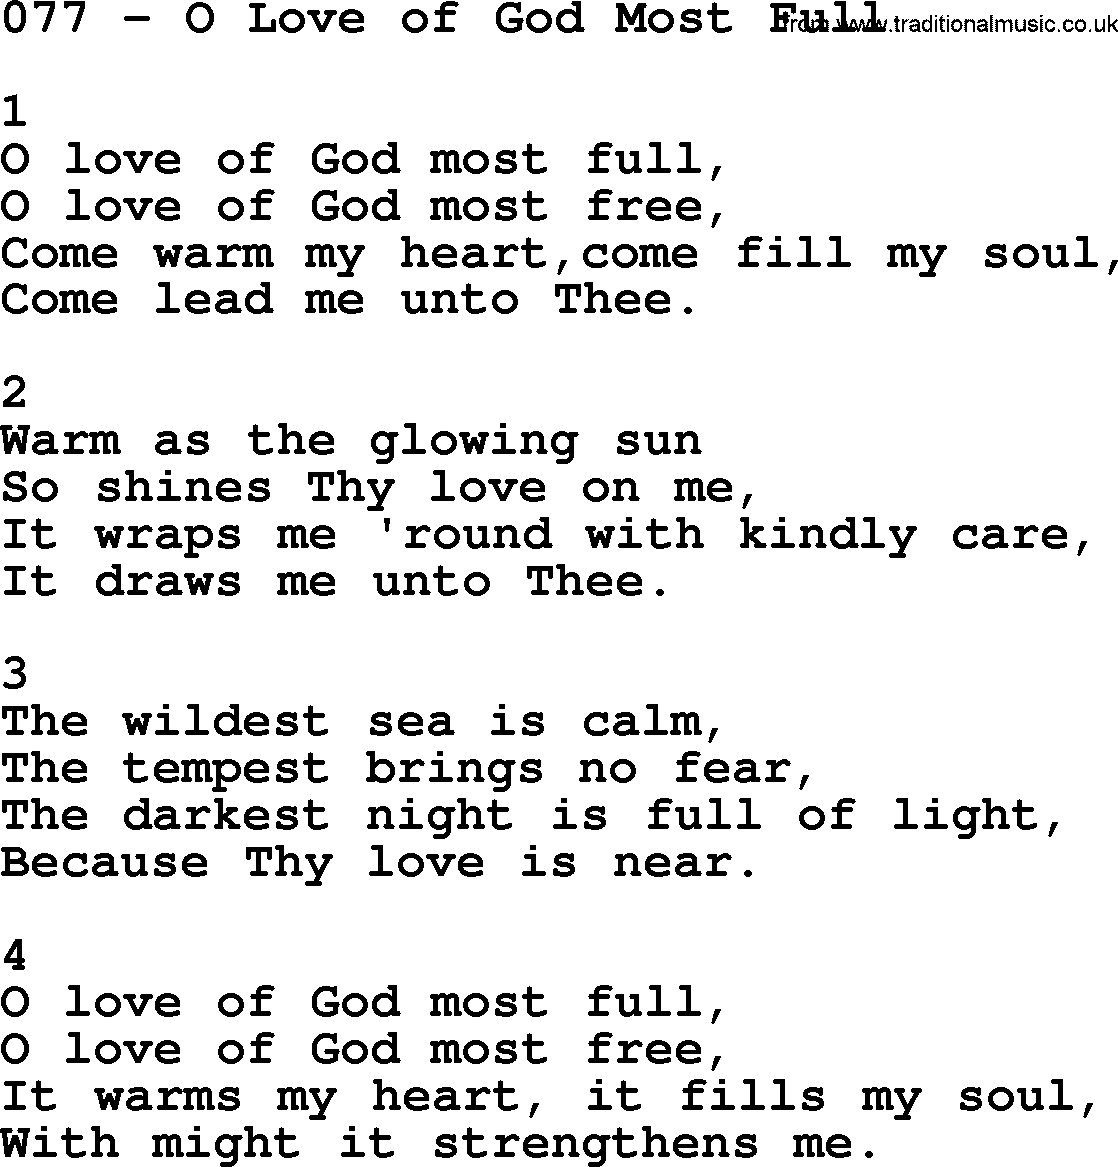 Complete Adventis Hymnal, title: 077-O Love Of God Most Full, with lyrics, midi, mp3, powerpoints(PPT) and PDF,